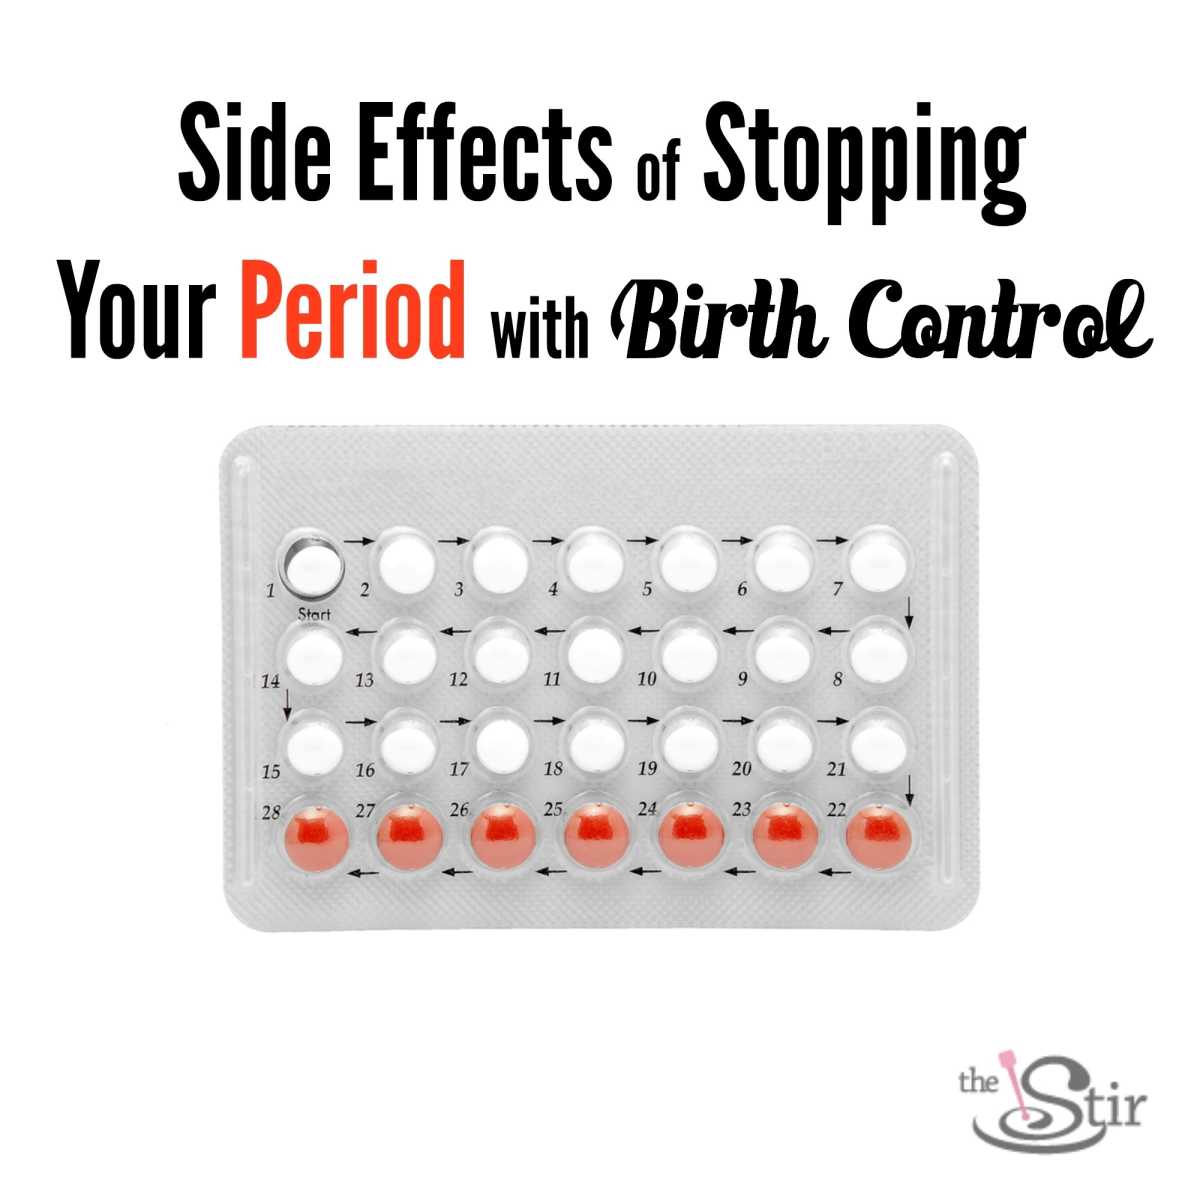 Preventing Your Period With Birth Control Comes at a ...